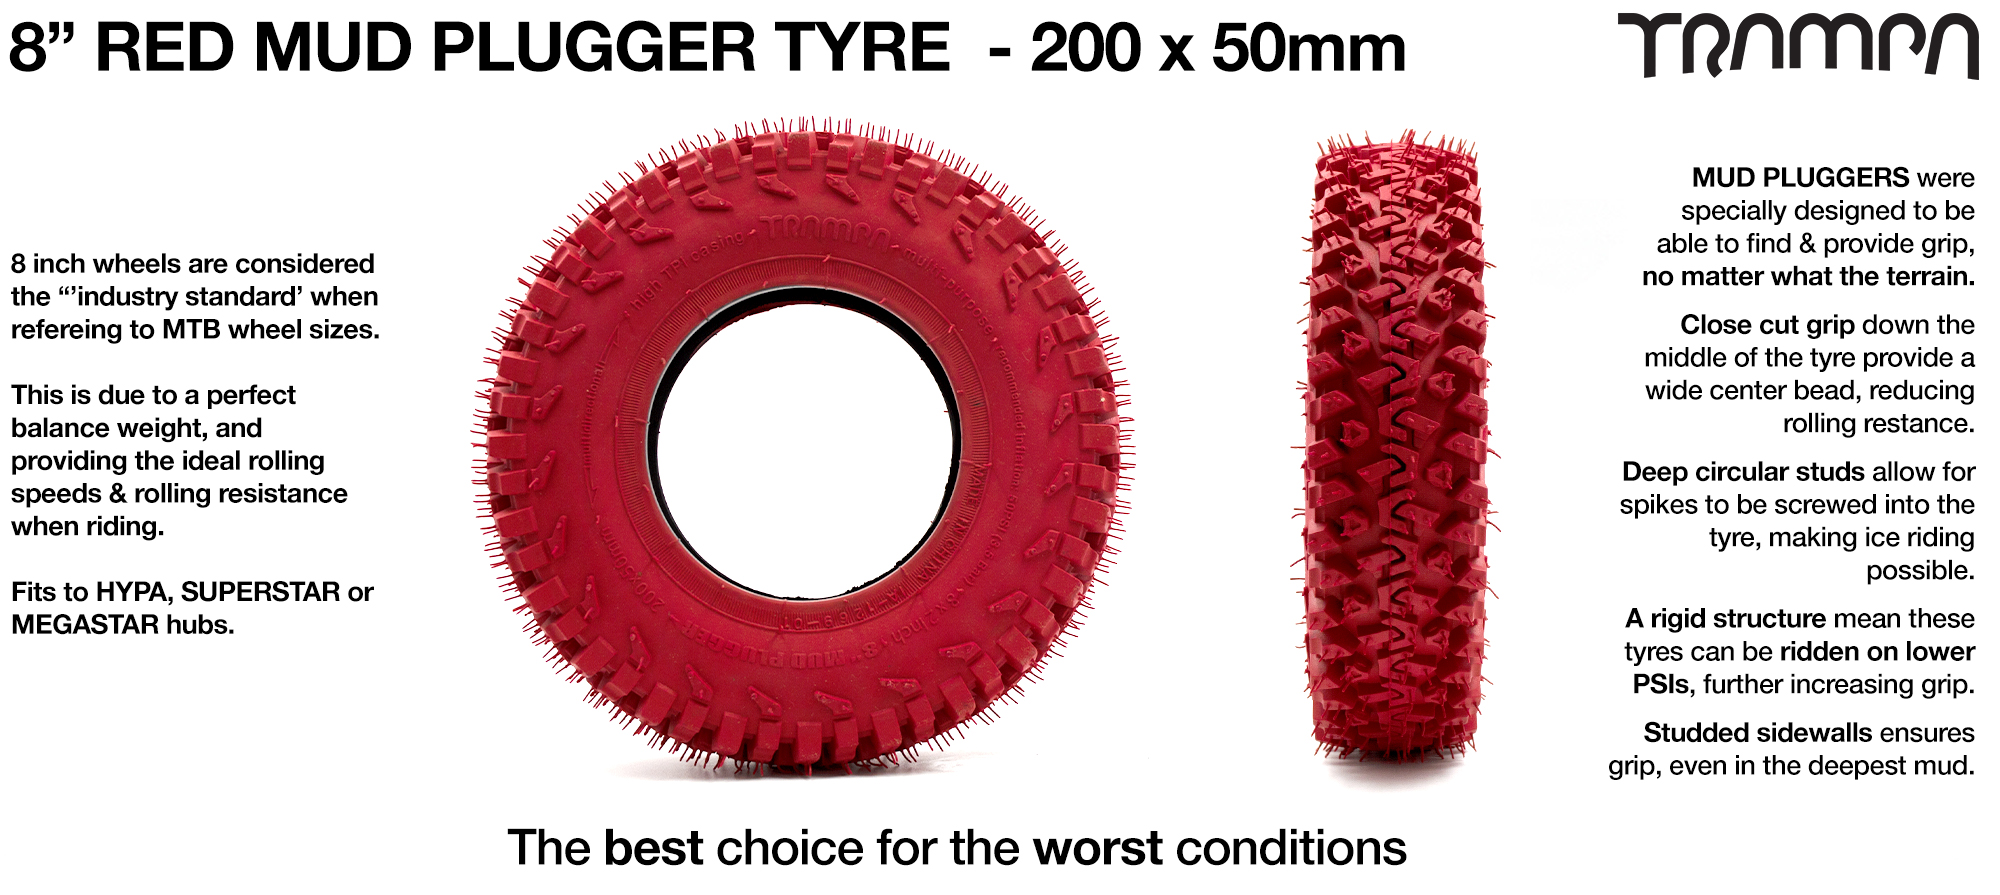 8 Inch TRAMPA Mud-Plugger Tyre - RED 